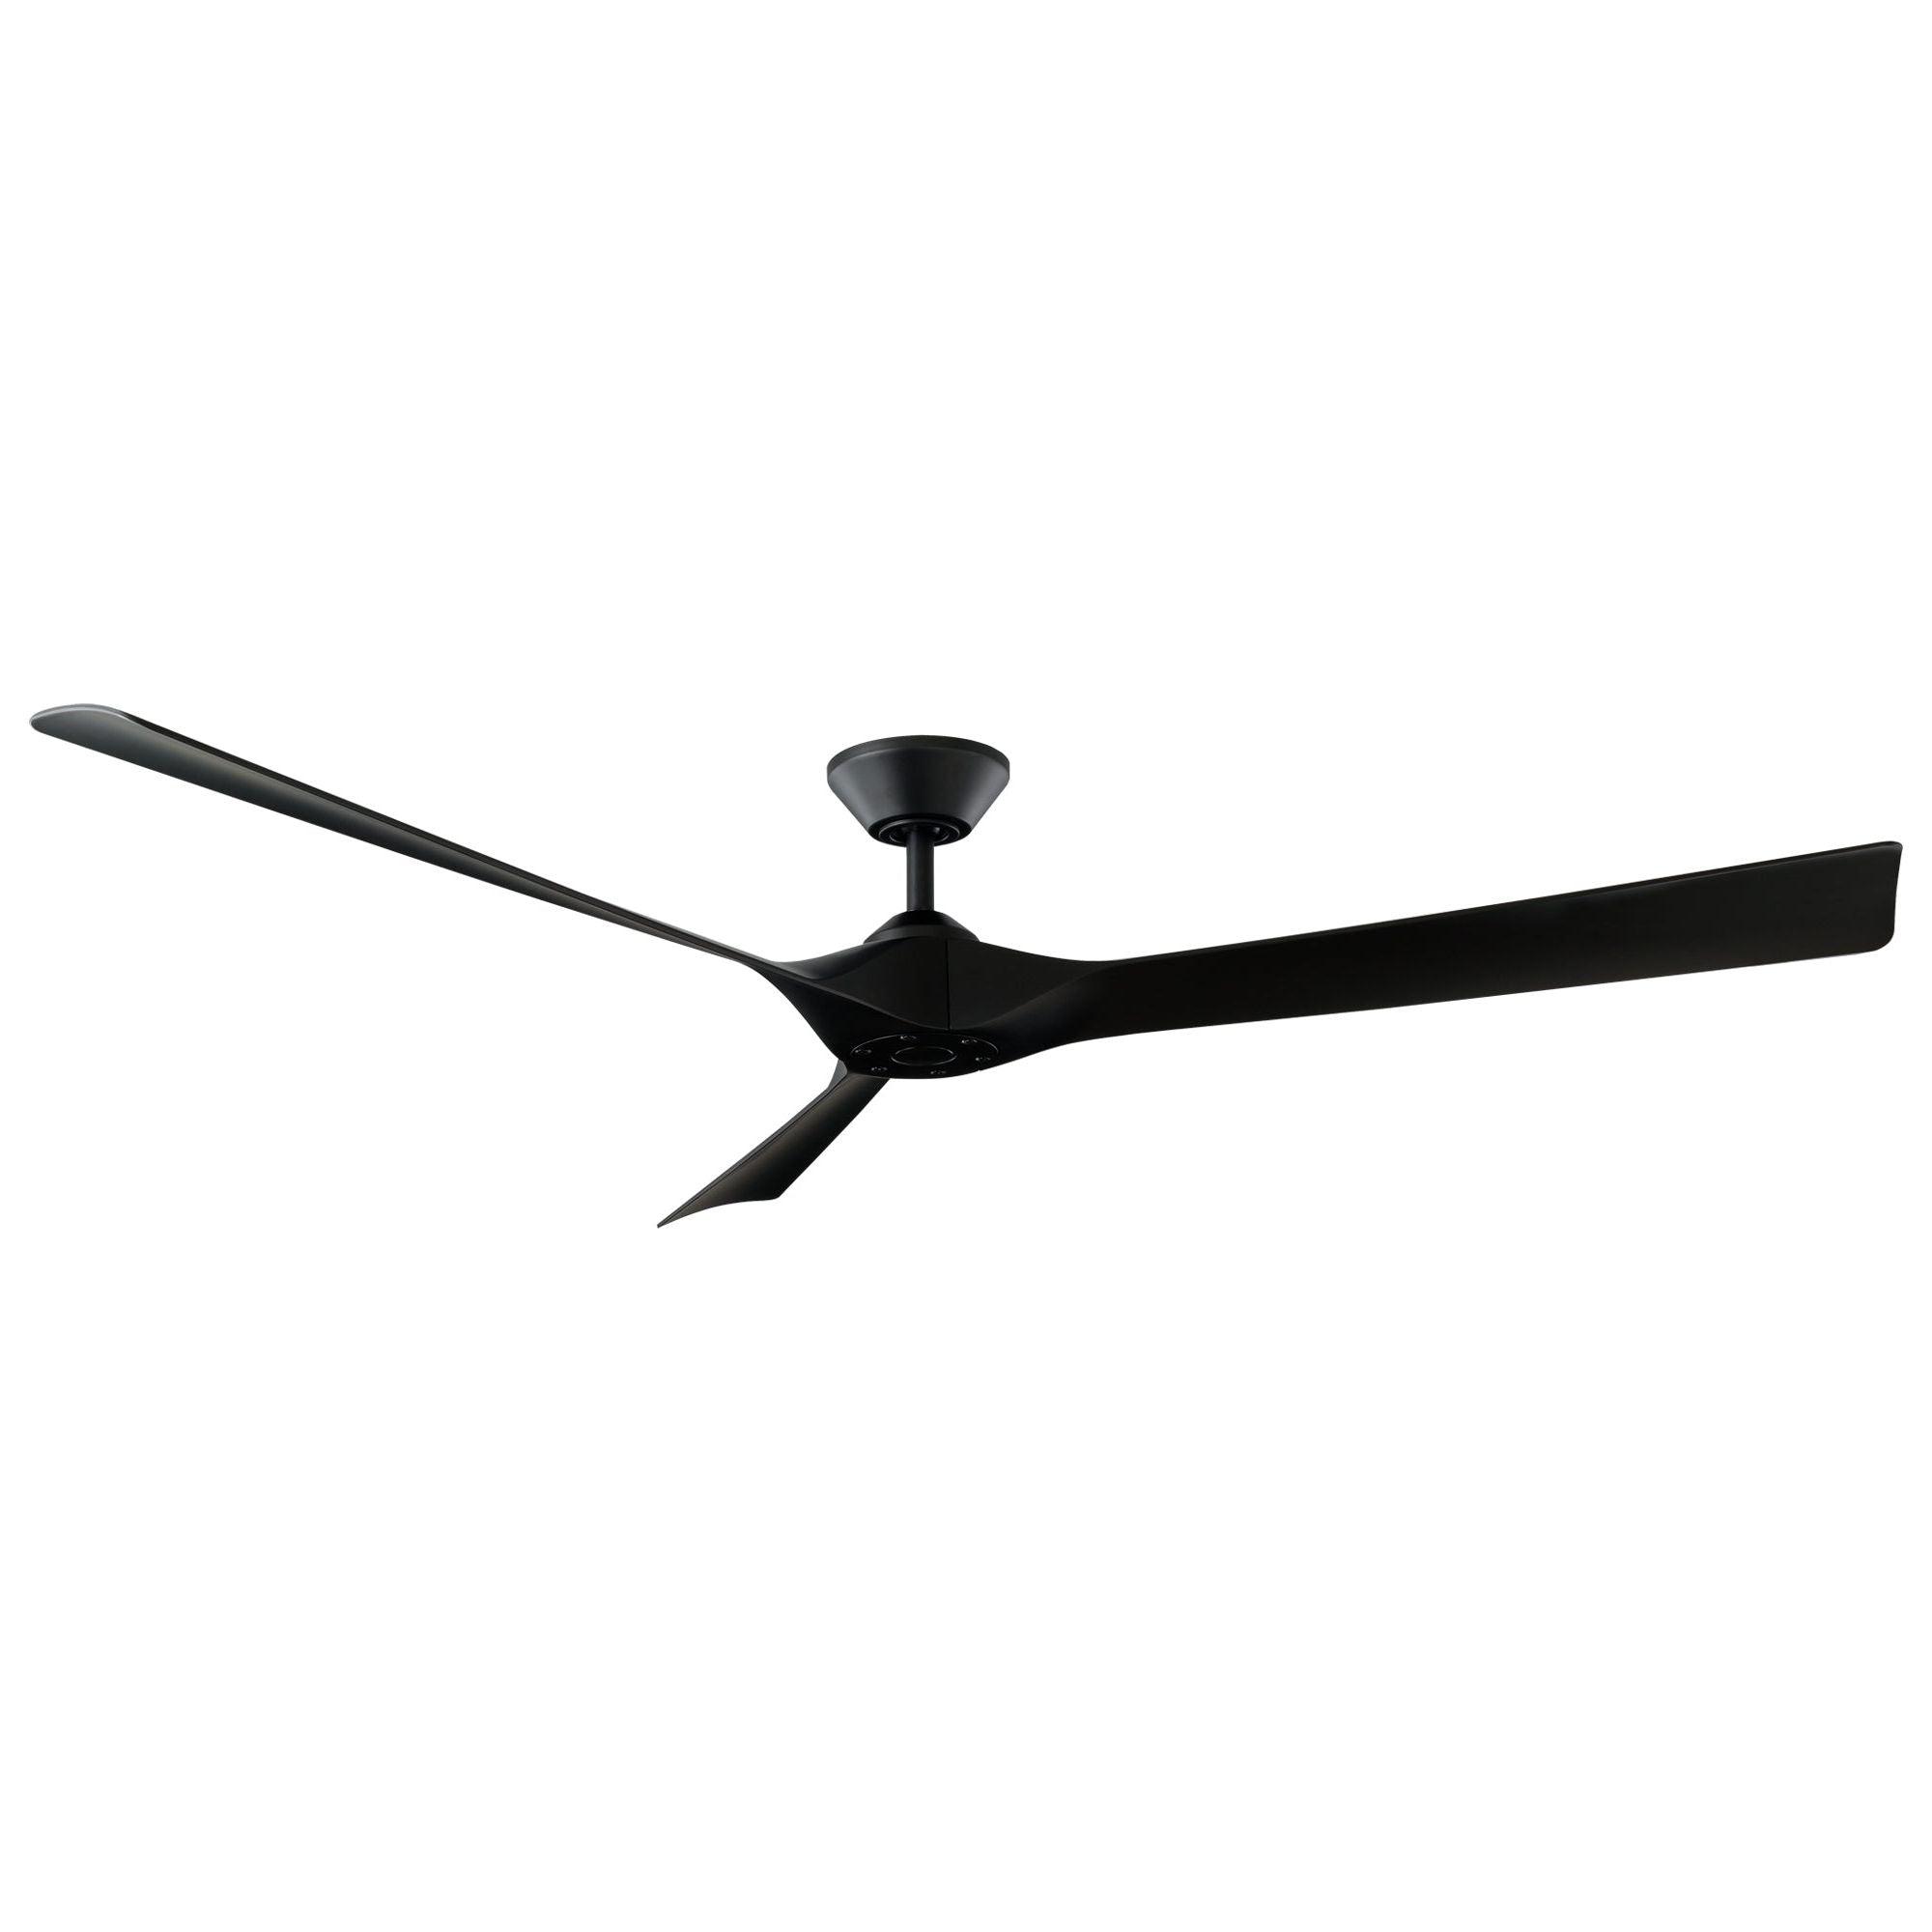 Modern Forms - Torque Indoor/Outdoor 3-Blade 70" Smart Ceiling Fan with Remote Control - Lights Canada